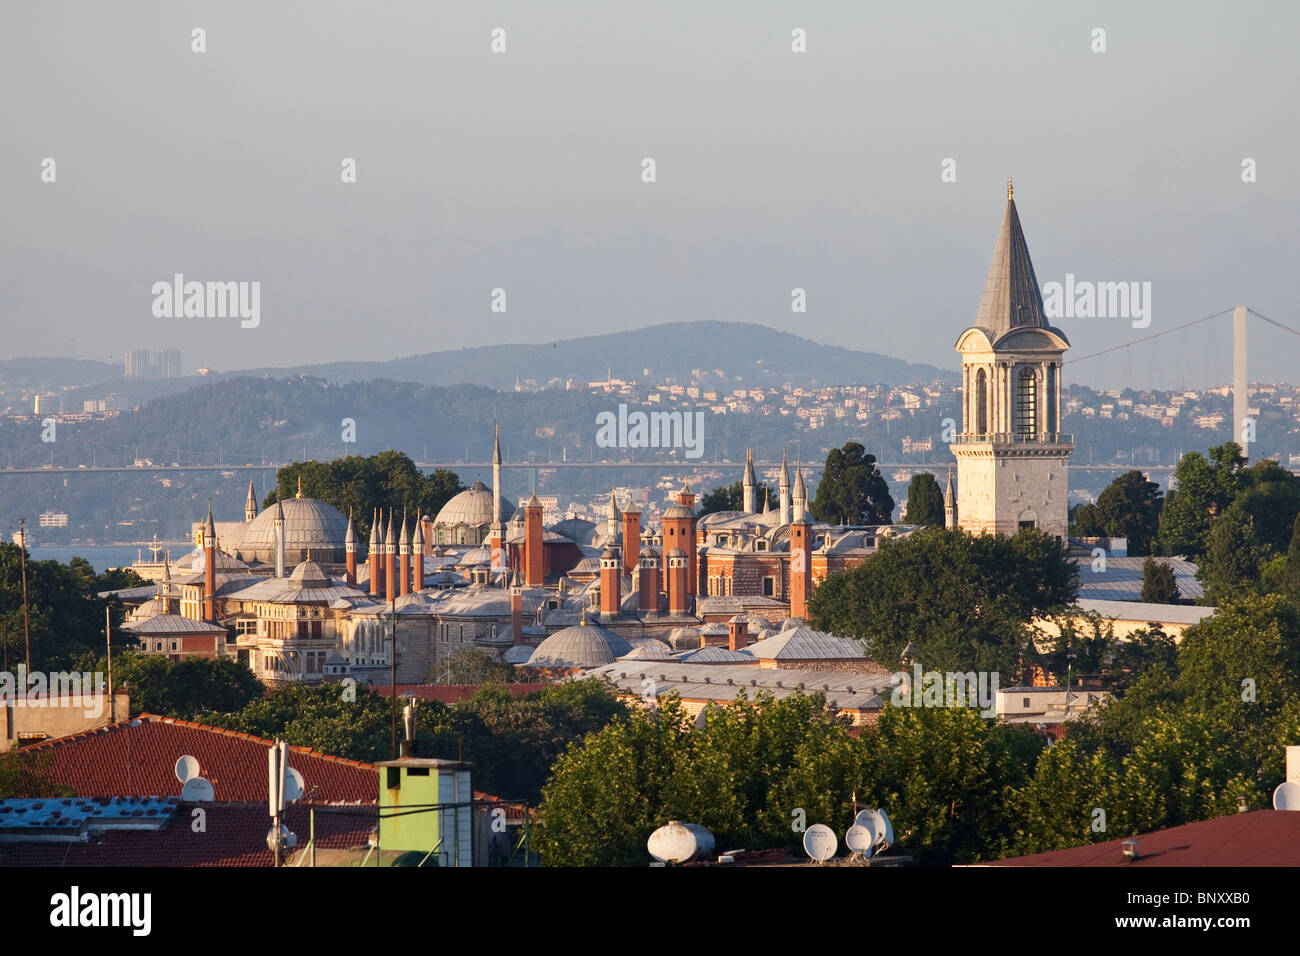 Rooftops of Topkapi Palace in Istanbul, Turkey Stock Photo